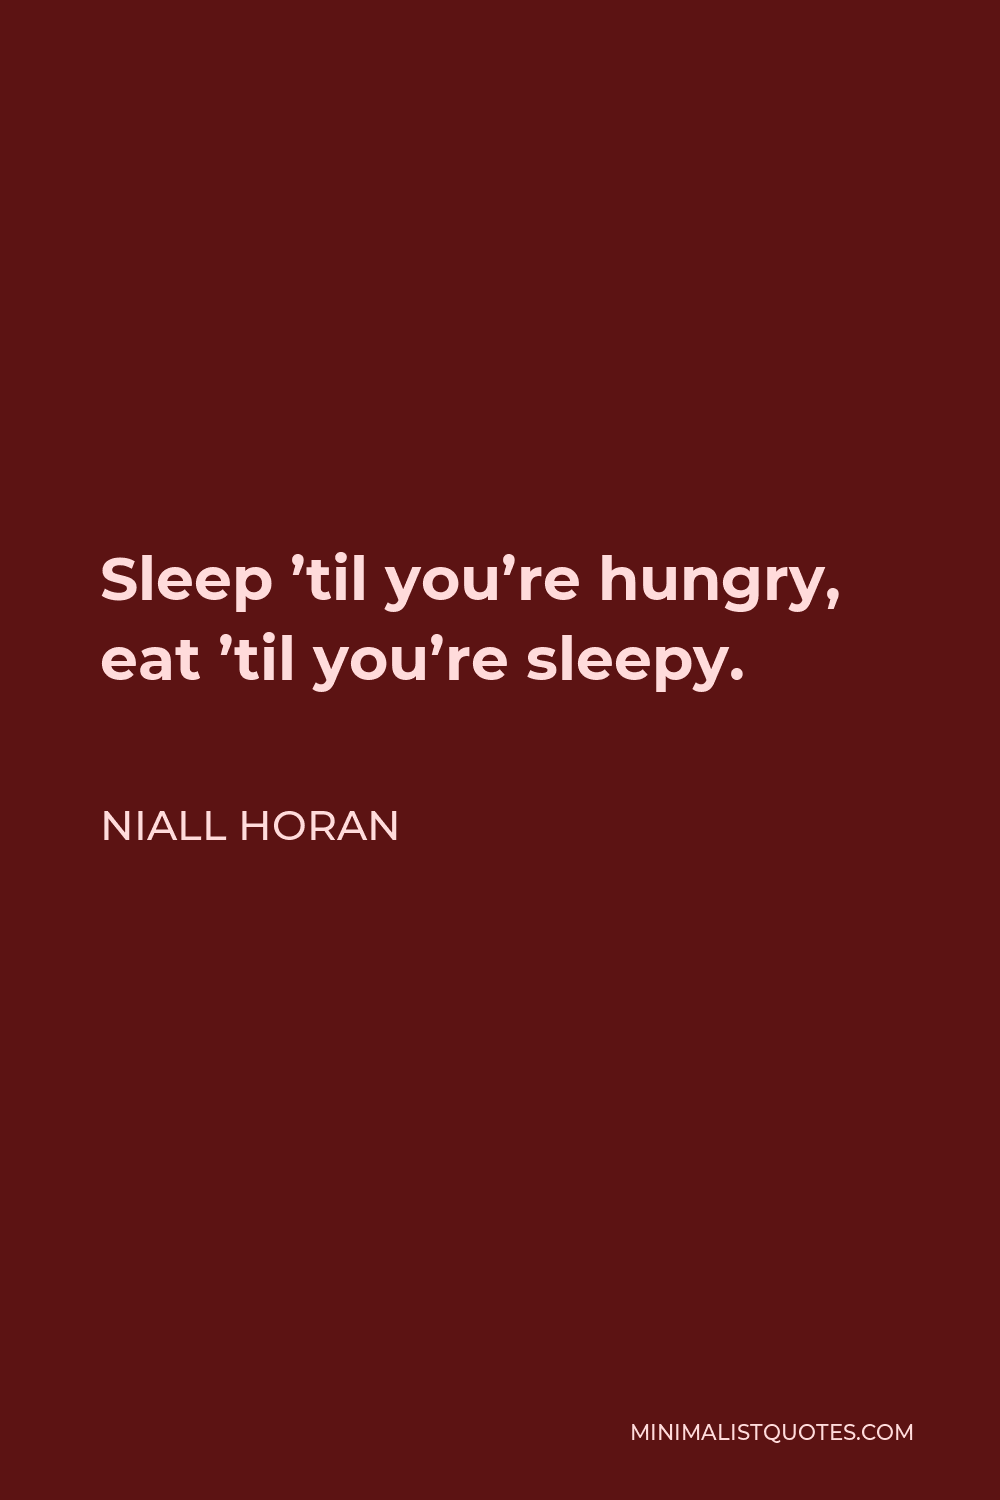 Niall Horan Quote - Sleep ’til you’re hungry, eat ’til you’re sleepy.